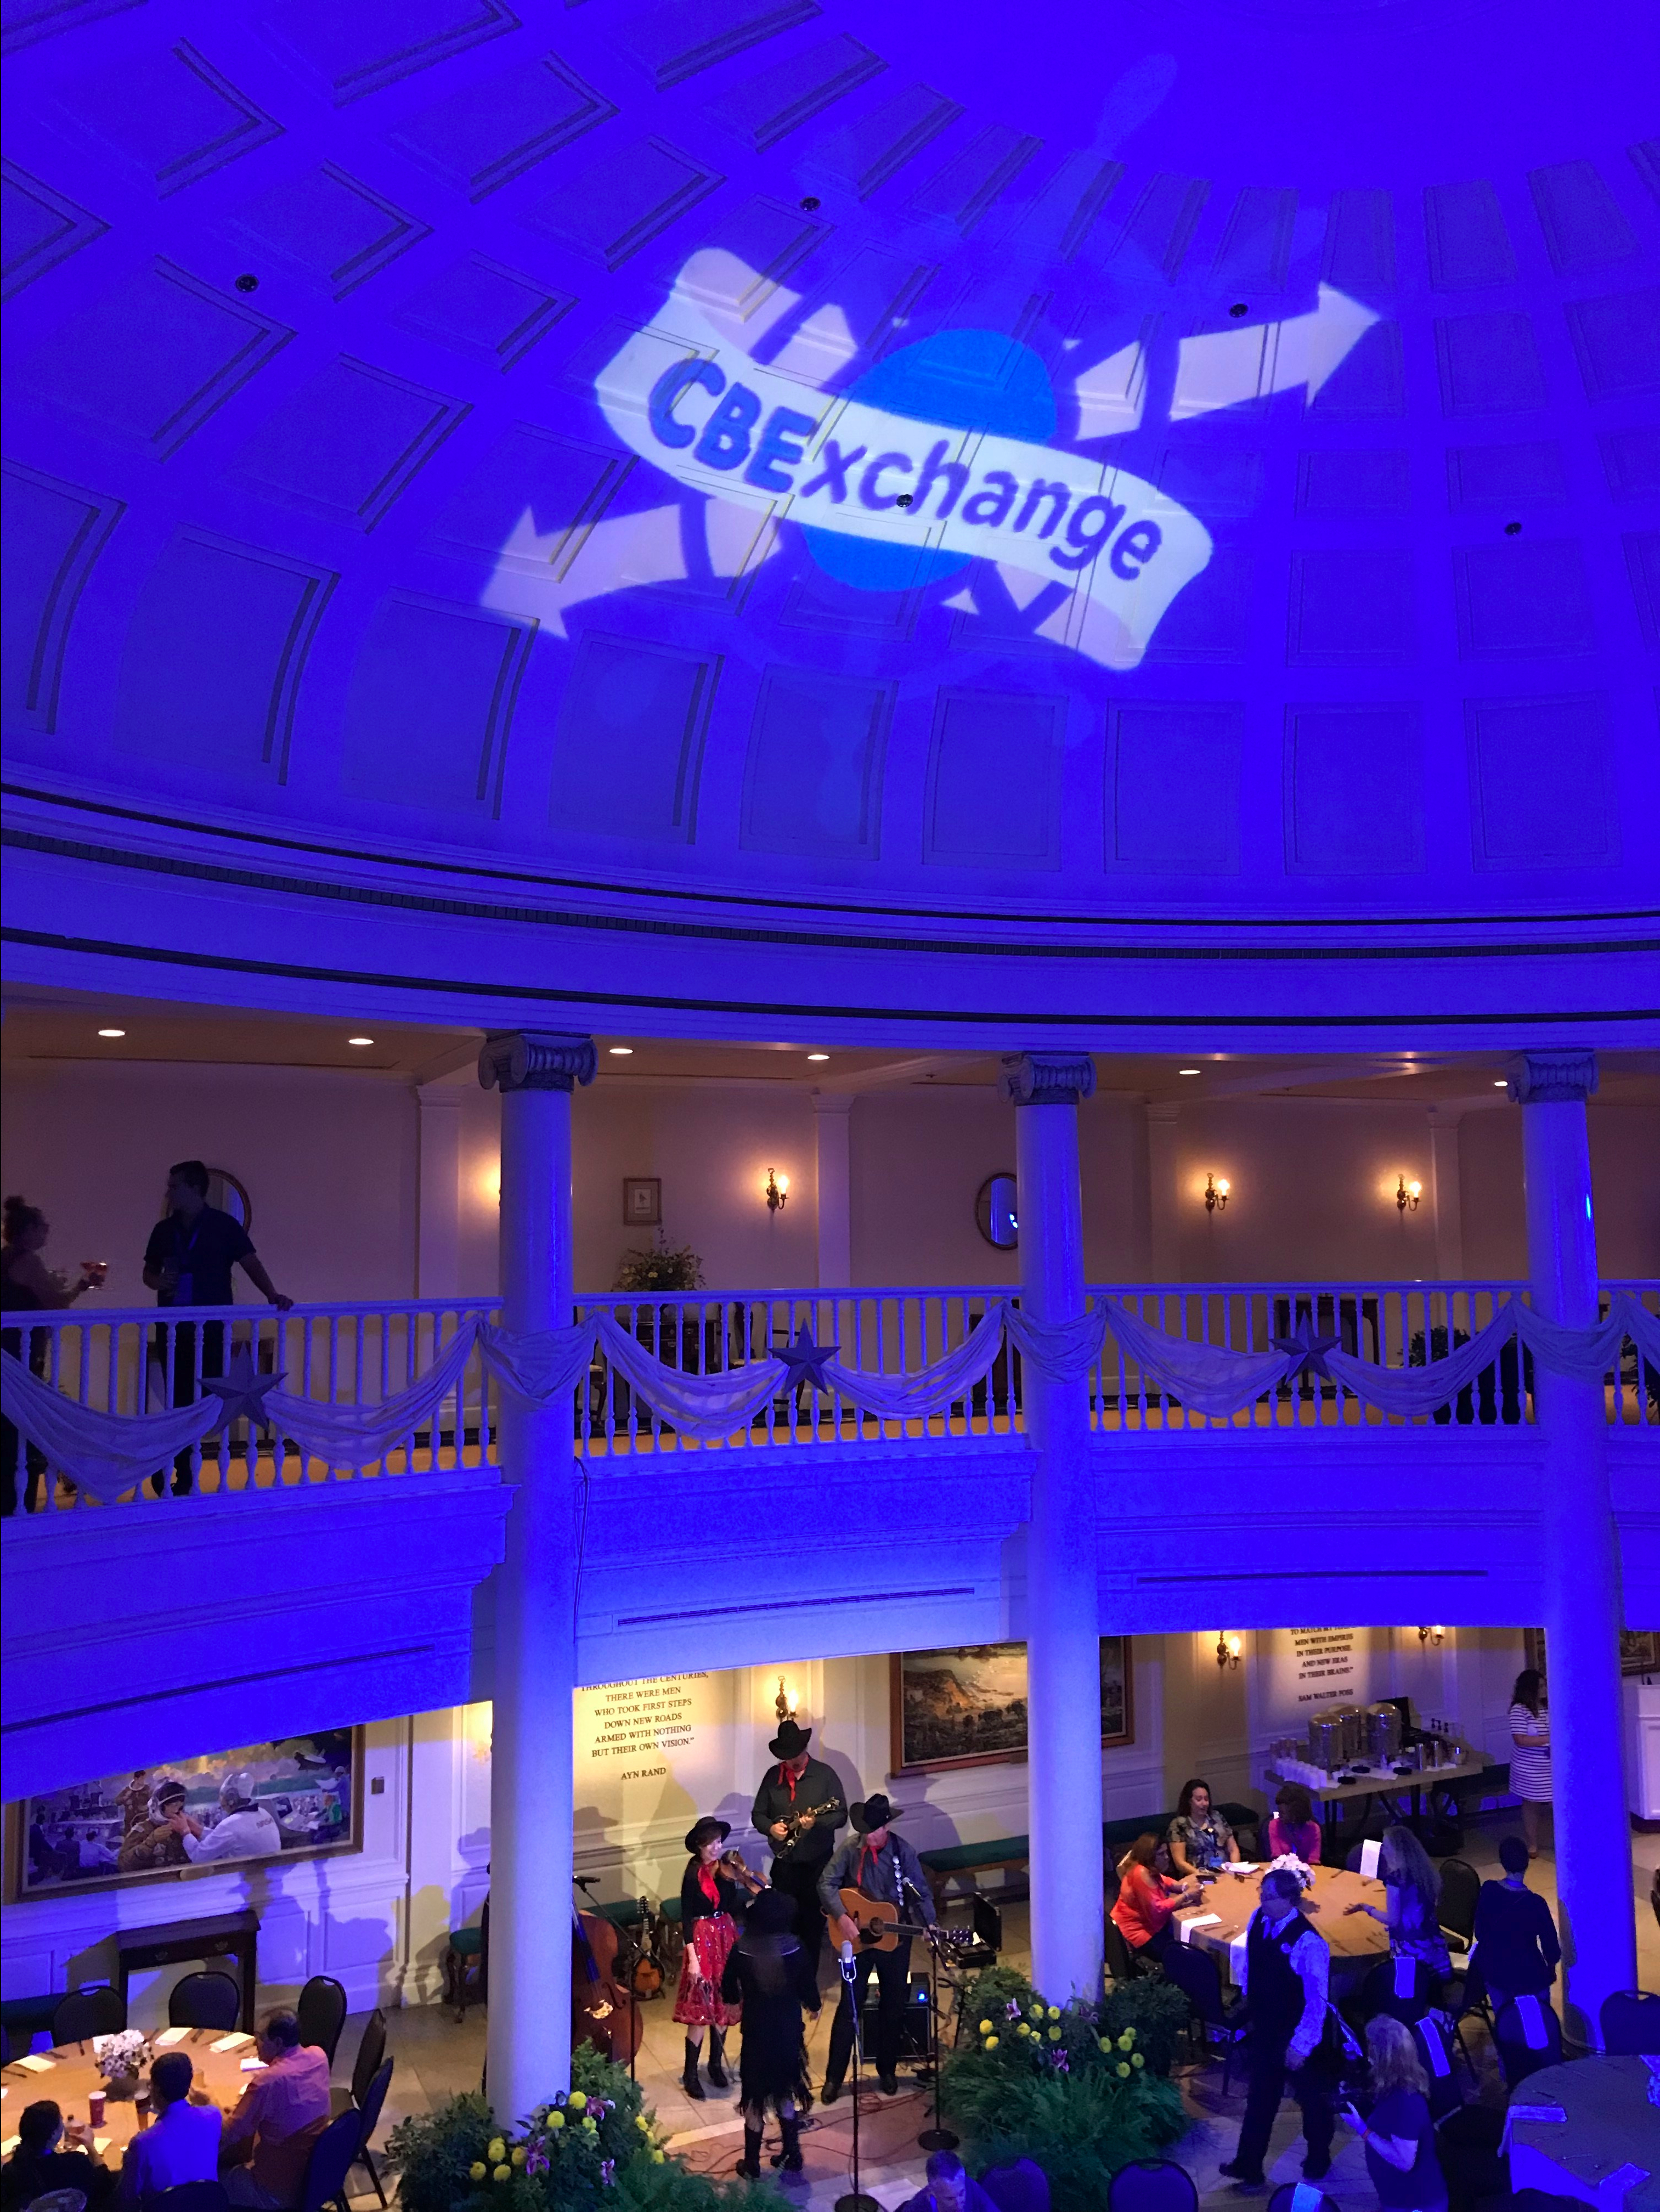 Large room with lighting changd to blue and the CBEExchange logo projected onto the ceiling.